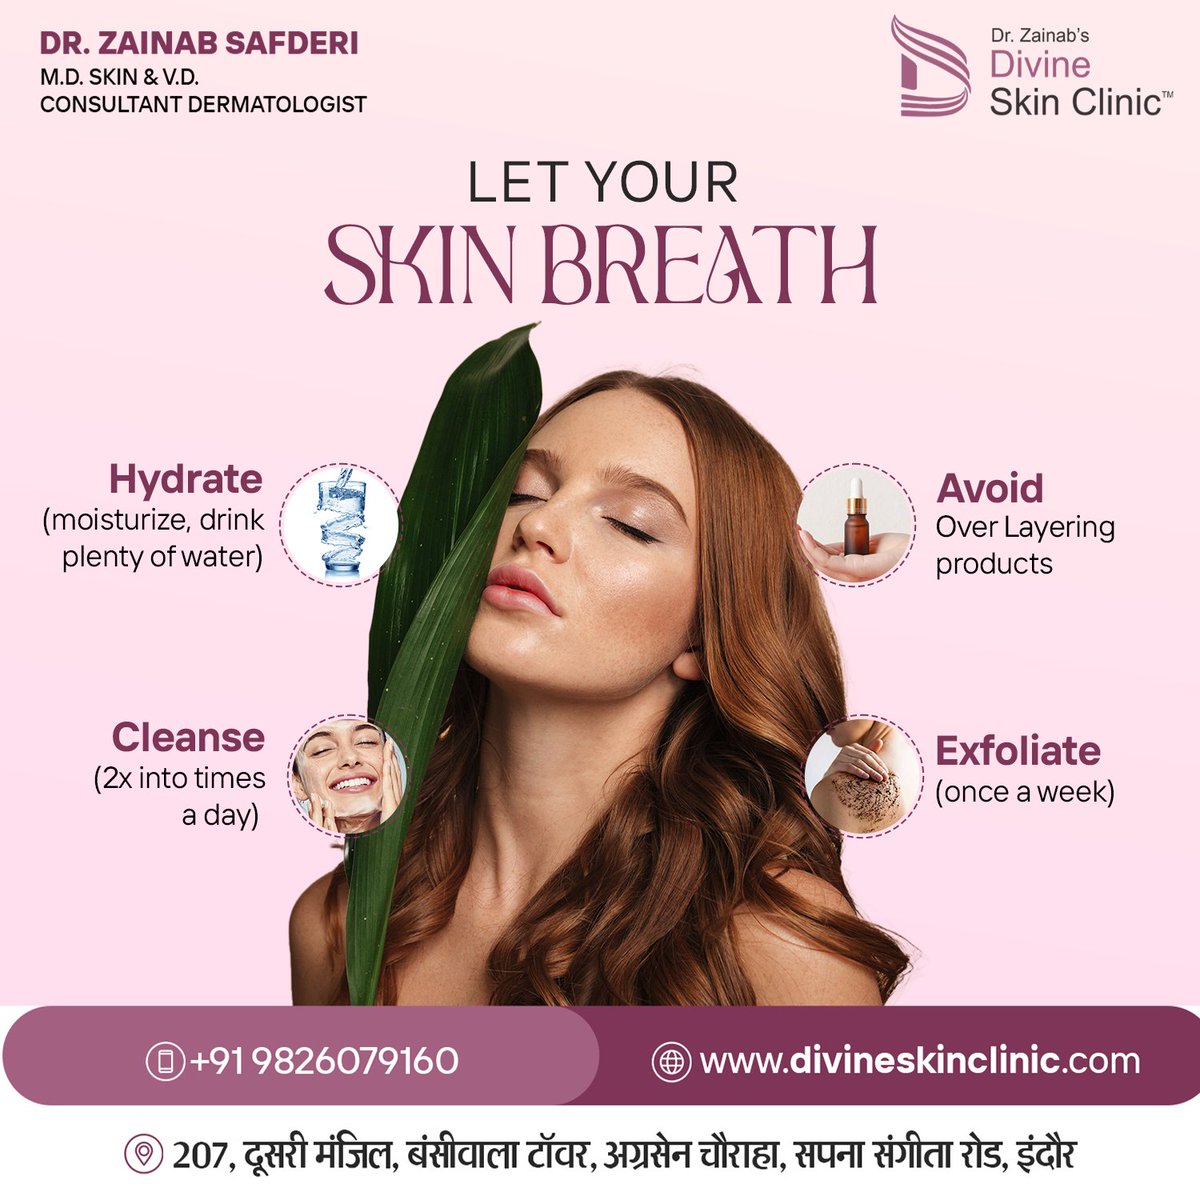 Give your skin room to breathe with these simple tips! 💦🌿 Hydrate, cleanse, streamline your routine, and exfoliate for a healthy glow. Let your skin shine in its natural beauty! It’s time to glow! 📞+91 9826079160 📍207, Bansiwala Tower, Near, Agrasen Square